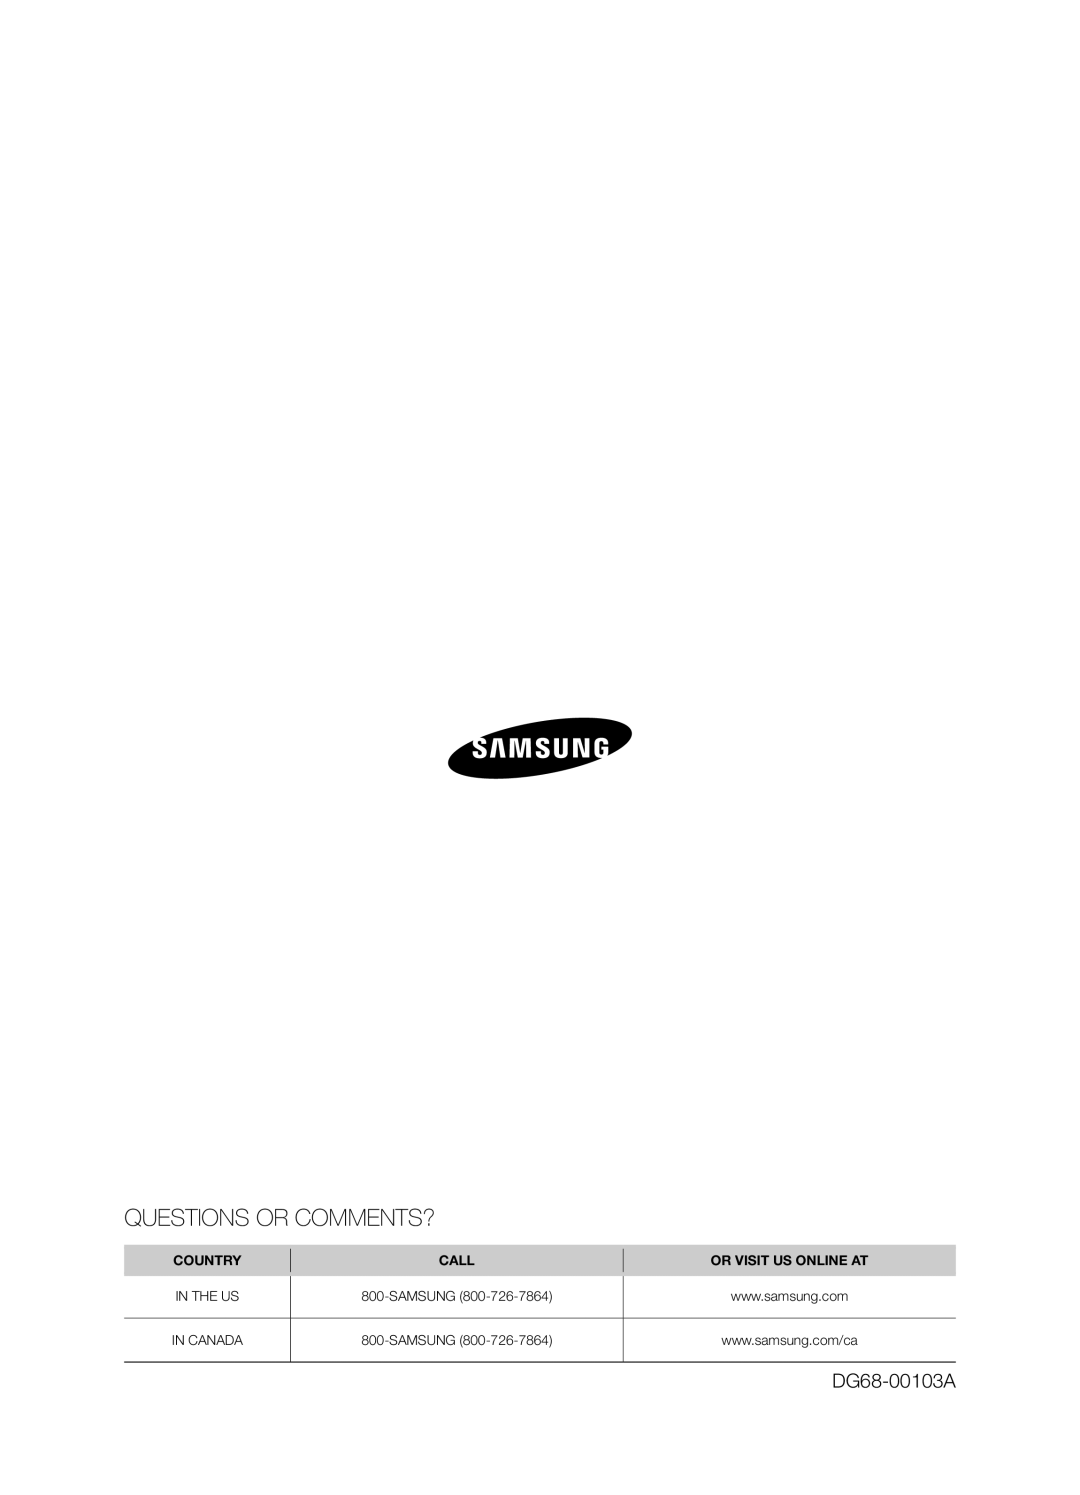 Samsung FTQ386LWUX Questions Or Comments?, DG68-00103A, Country, Call, Or Visit Us Online At, In The Us, Samsung 